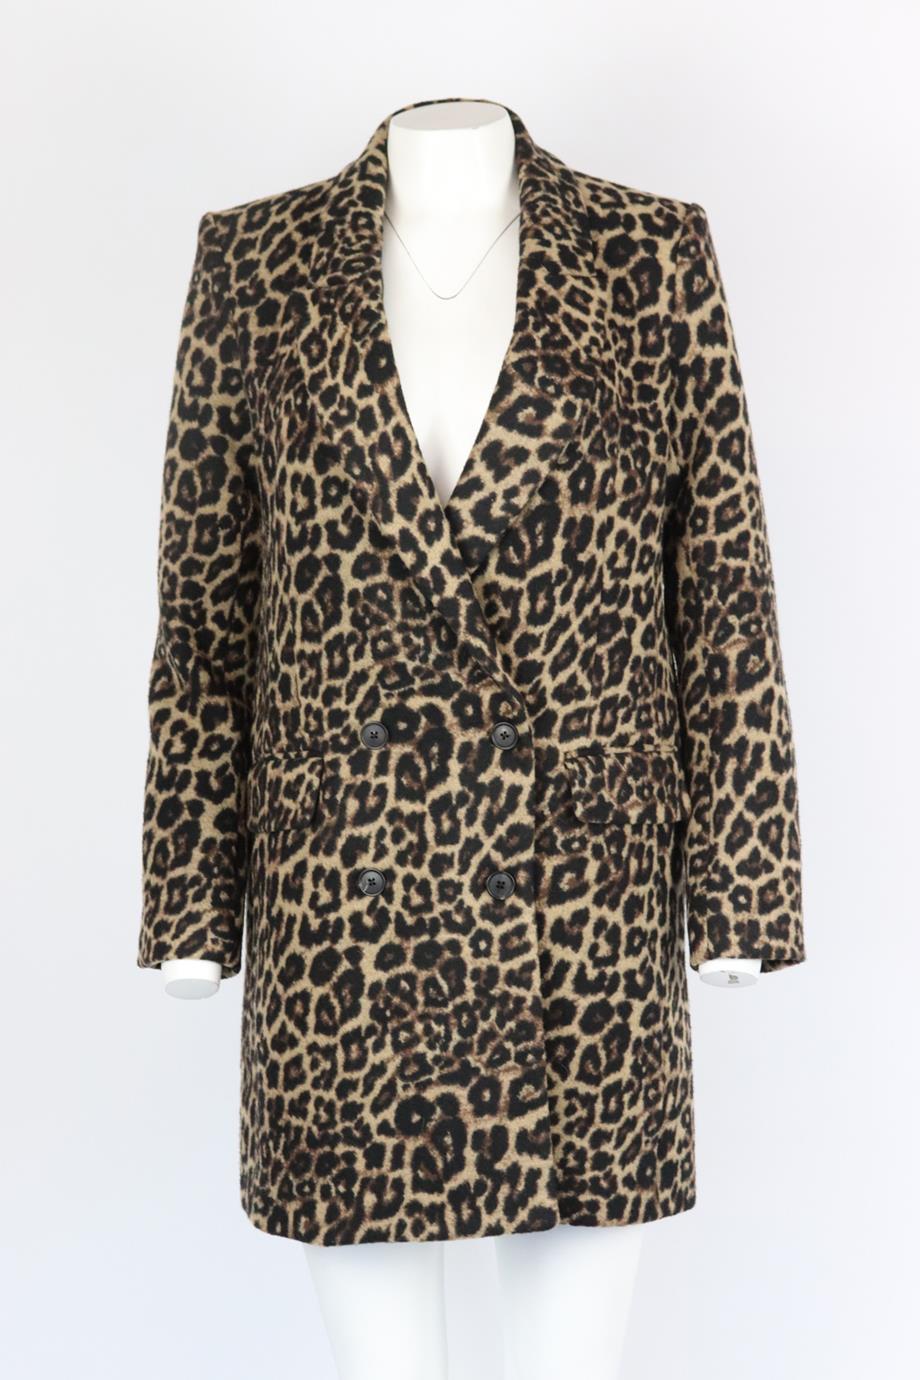 Veronica Beard leopard print wool blend coat. Brown, beige and black. Long sleeve, v-neck. Button fastening at front. 45% Polyester, 35% acrylic, 20% wool; lining: 100% polyester. Size: US 6 (UK 10, FR 38, IT 42) Shoulder to shoulder: 15.5 in. Bust: